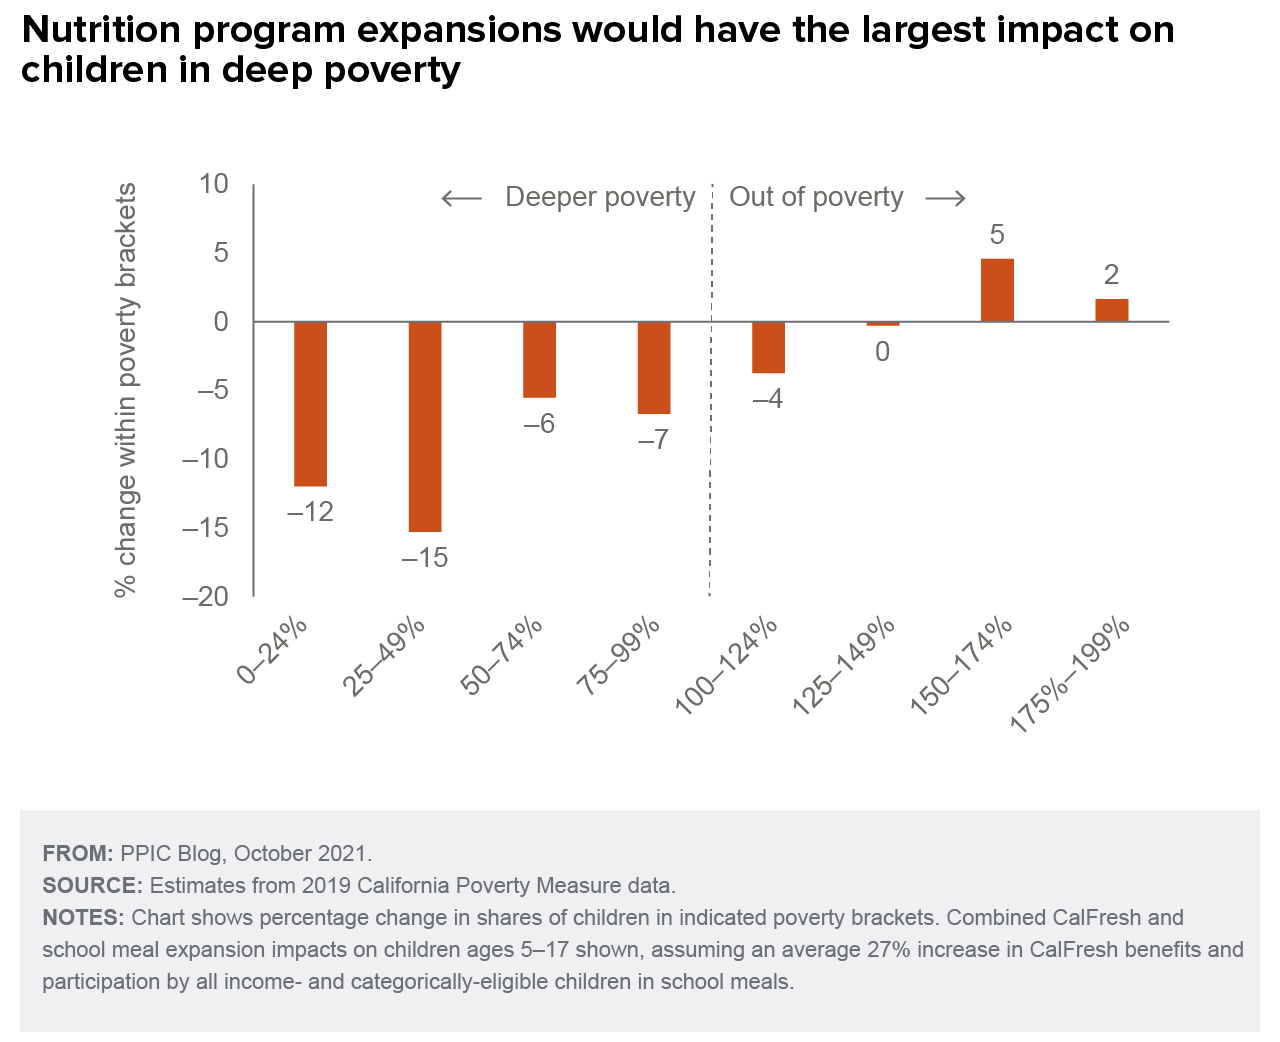 figure - Nutrition program expansions would have the largest impact on children in deep poverty